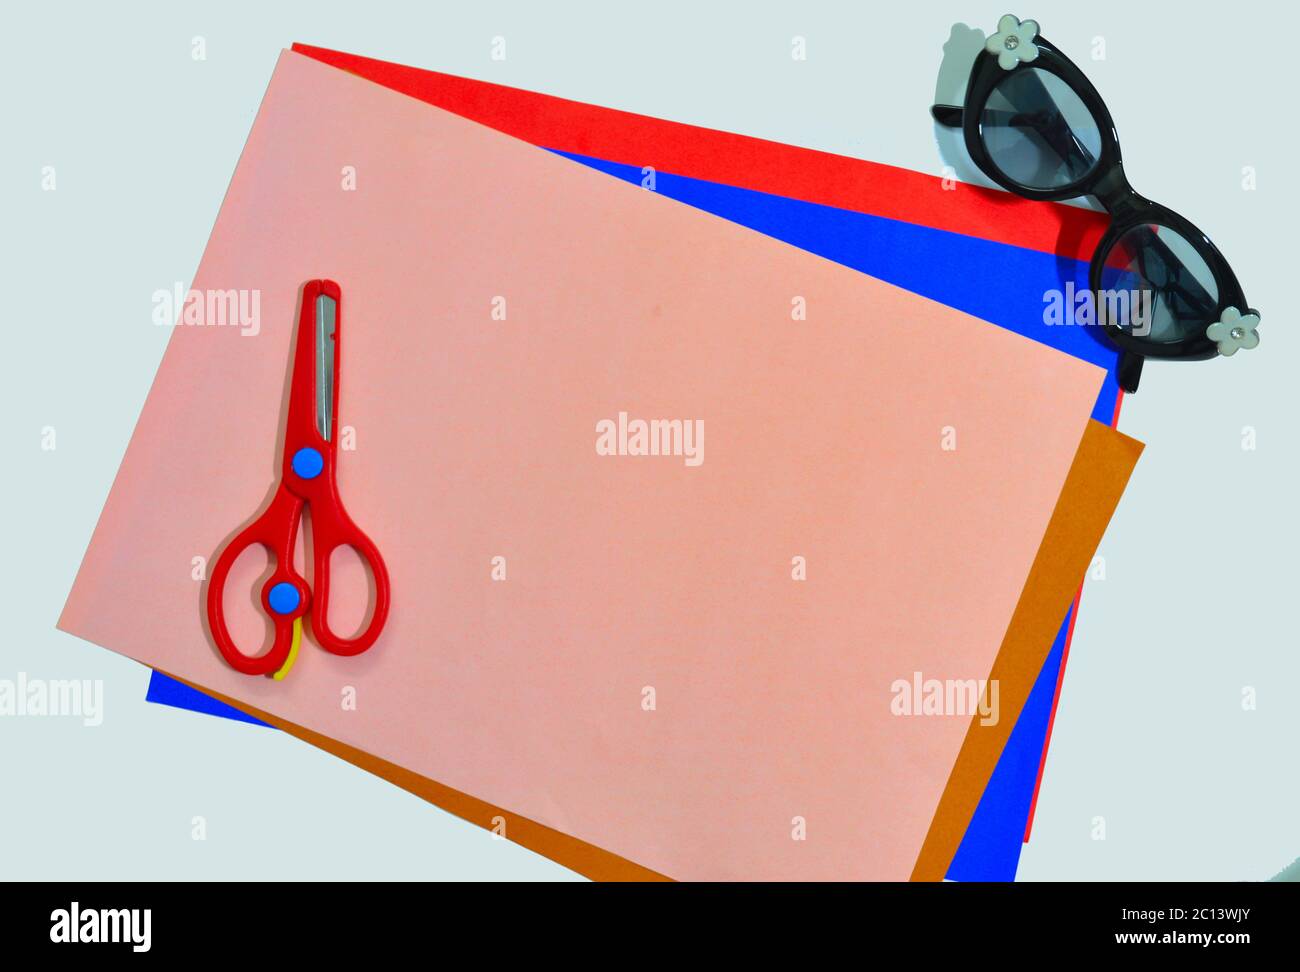 colour papers, scissors and specs on a white surface indicating a kid's activity desk Stock Photo